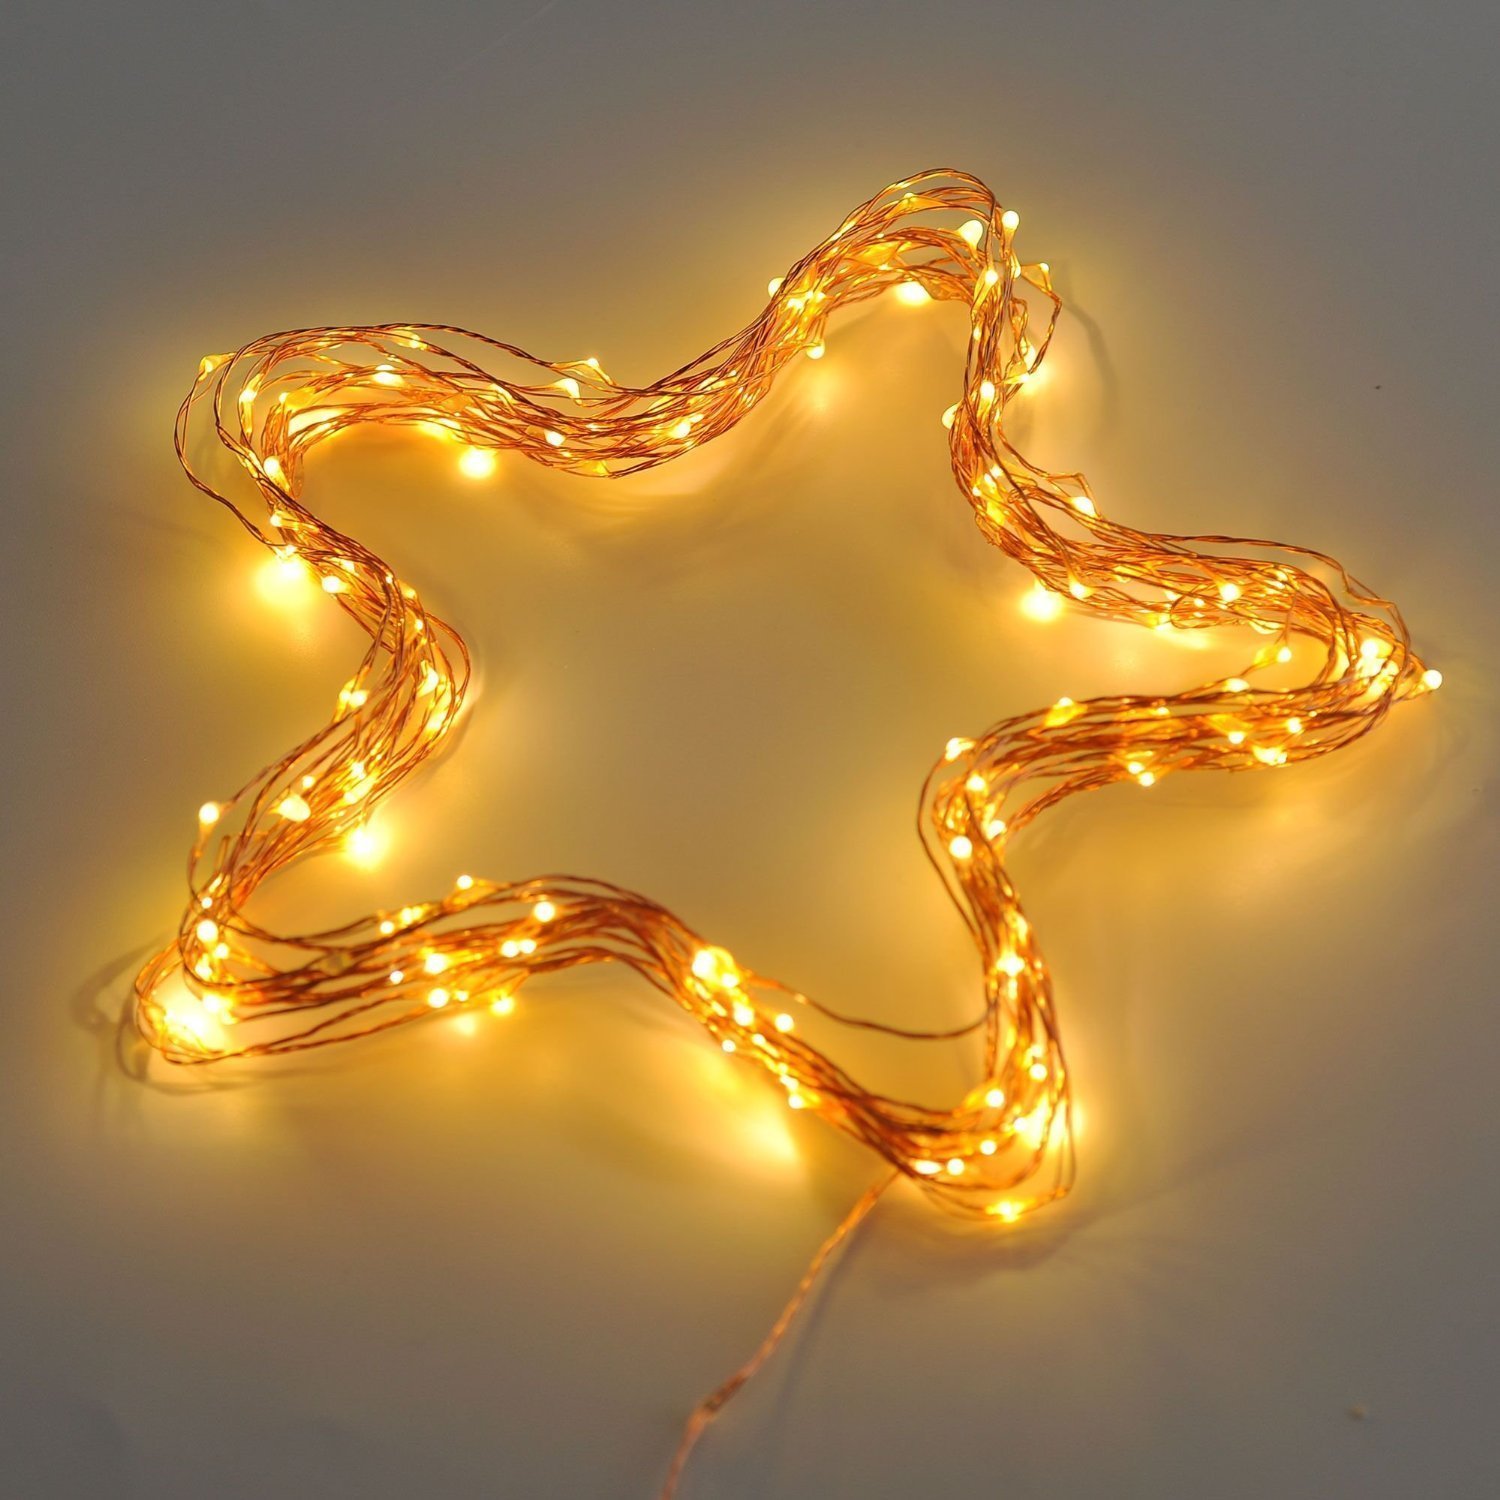 Amazon.com: 20FT Starry String Lights Warm White Color LED's on a ...